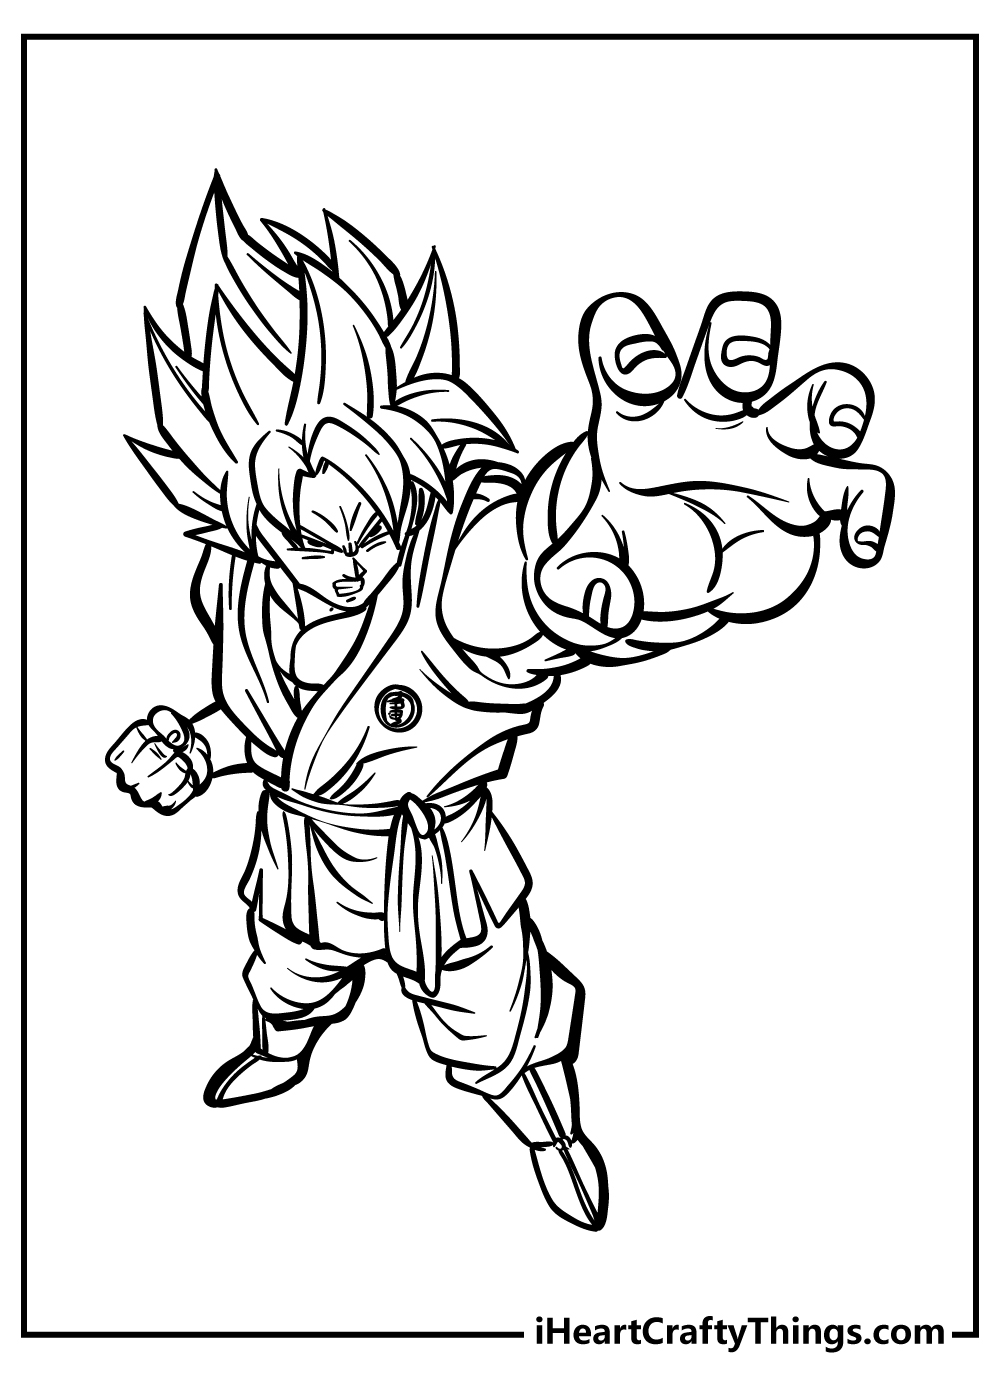 Goku Coloring Pages for preschoolers free printable